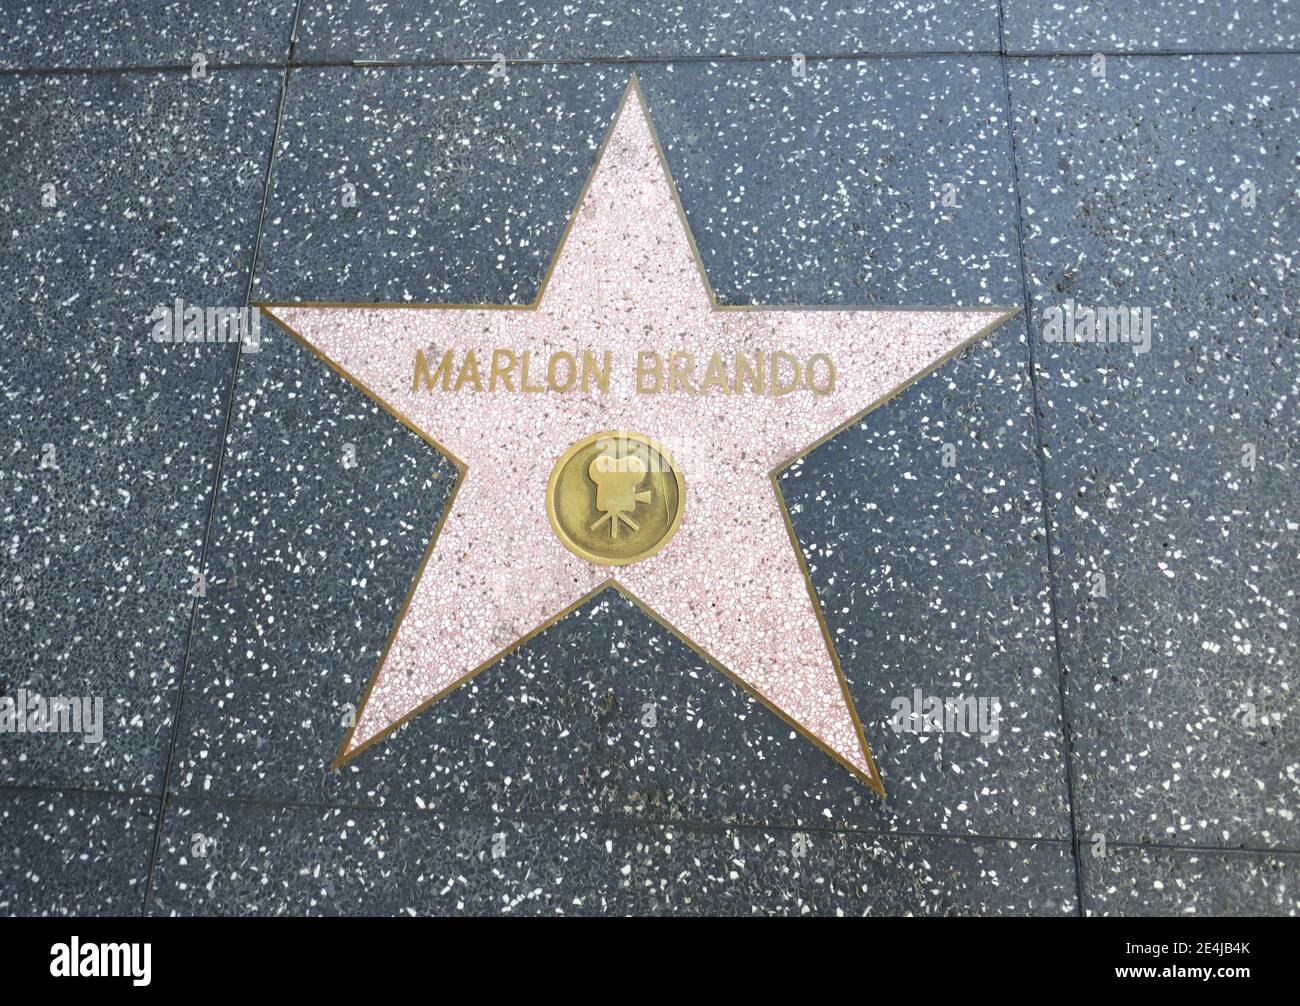 Los Angeles, California, USA 18th January 2021 A general view of atmosphere of actor Marlon Brando Star on Walk of Fame during Coronavirus Covid-19 Pandemic on January 18, 2021 in Los Angeles, California, USA. Photo by Barry King/Alamy Stock Photo Stock Photo